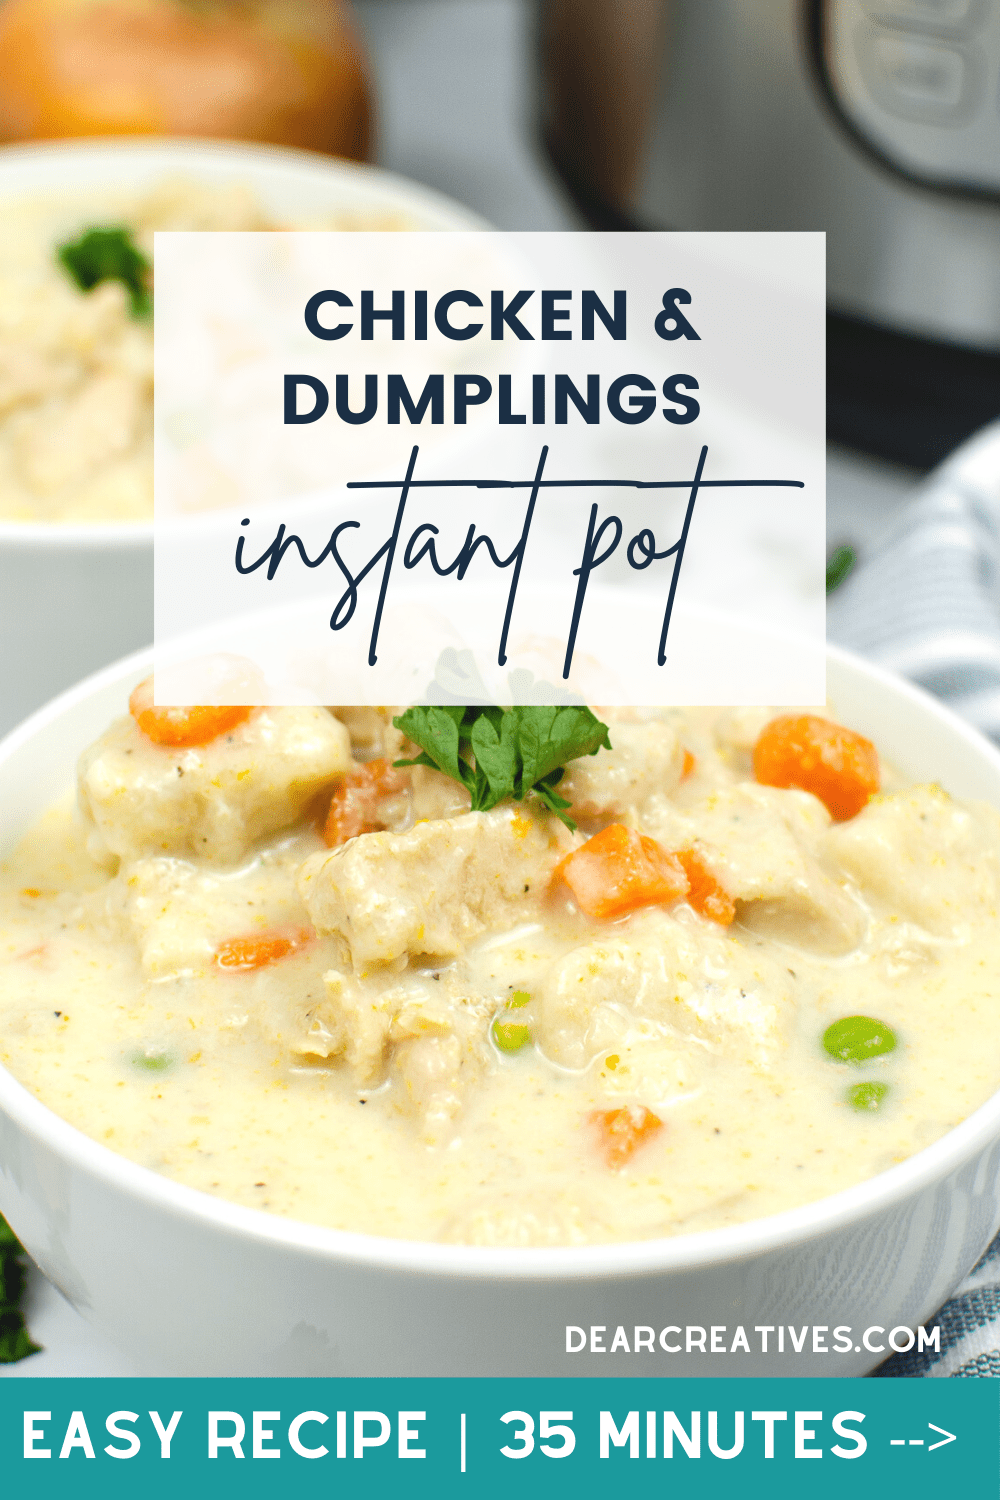 Instant Pot Chicken and Dumplings - Grab this easy recipe for chicken and dumplings. All the flavors and tastes you love tender chicken, creamy and comforting... DearCreatives.com